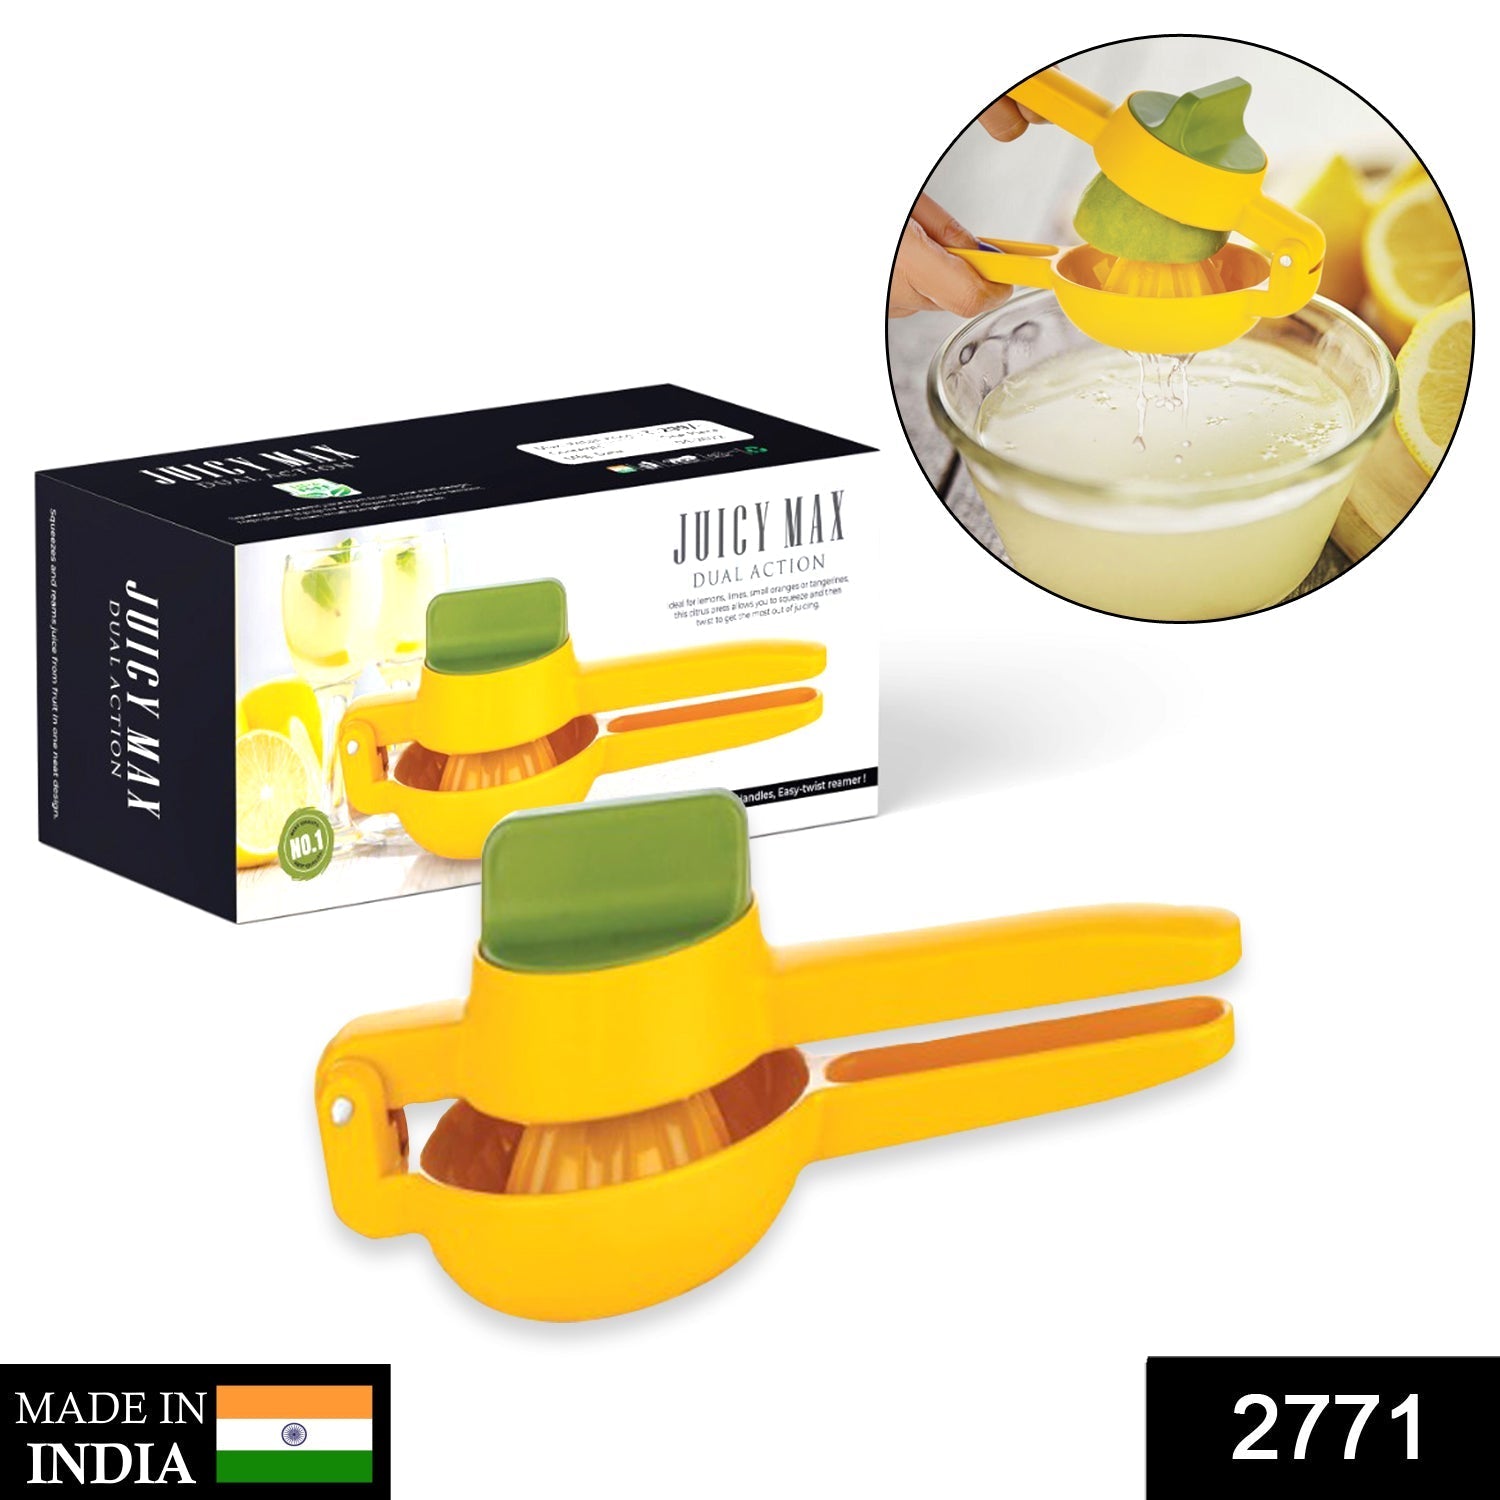 2771 Lemon Squeezer can be taken For Squeezing Lemons For Types Of Food Stuffs